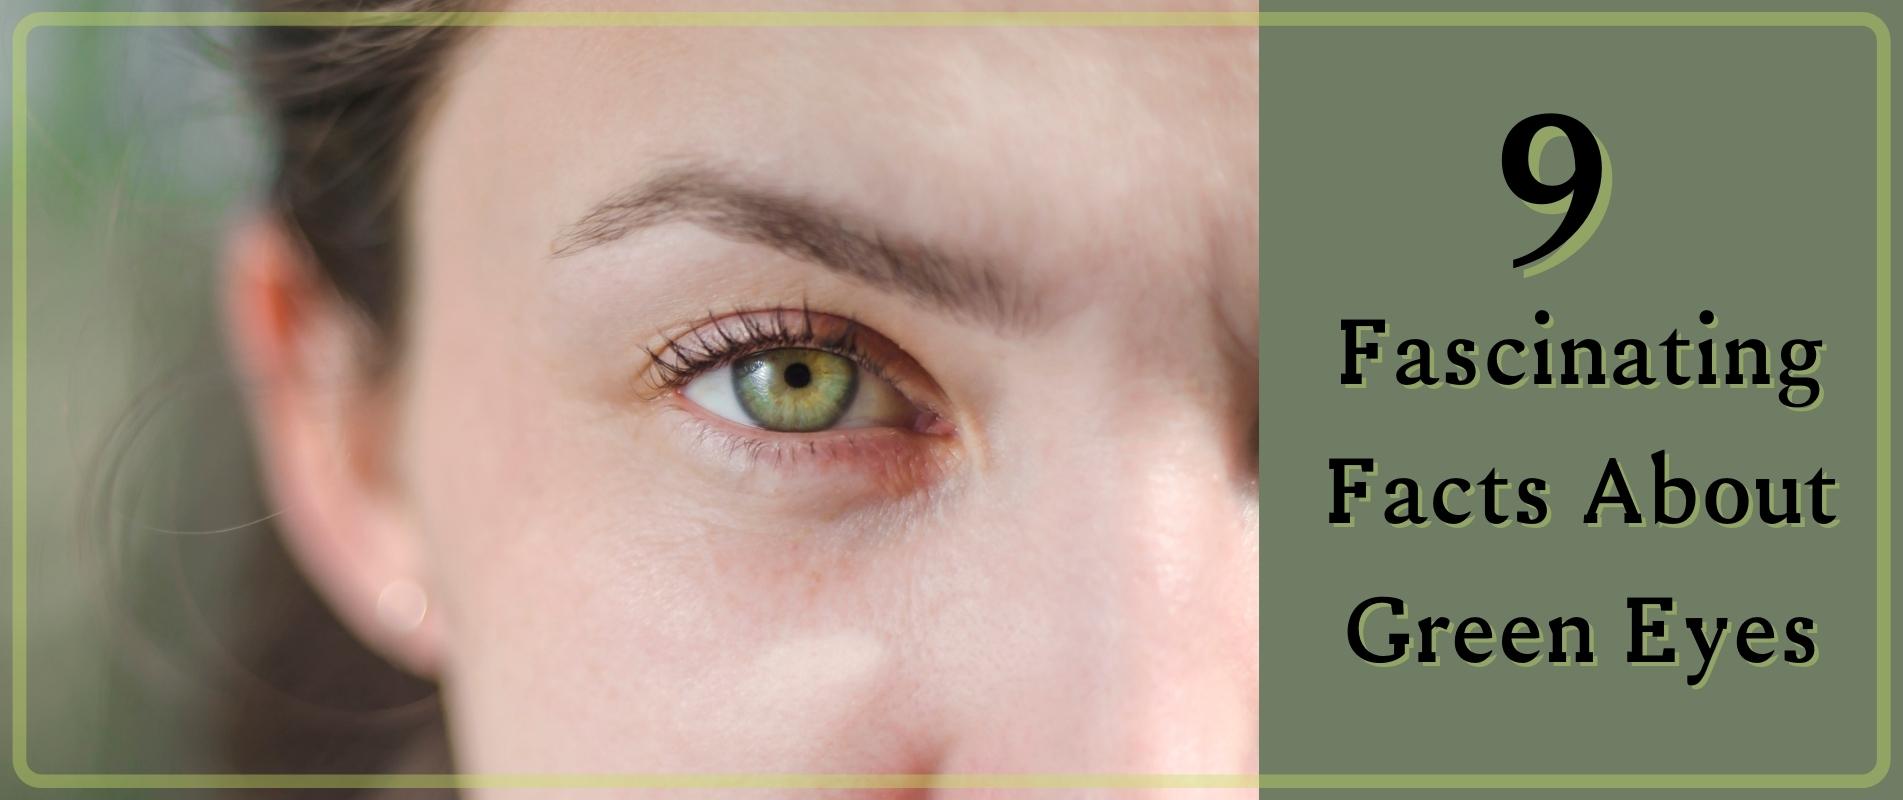 eye color personality facts